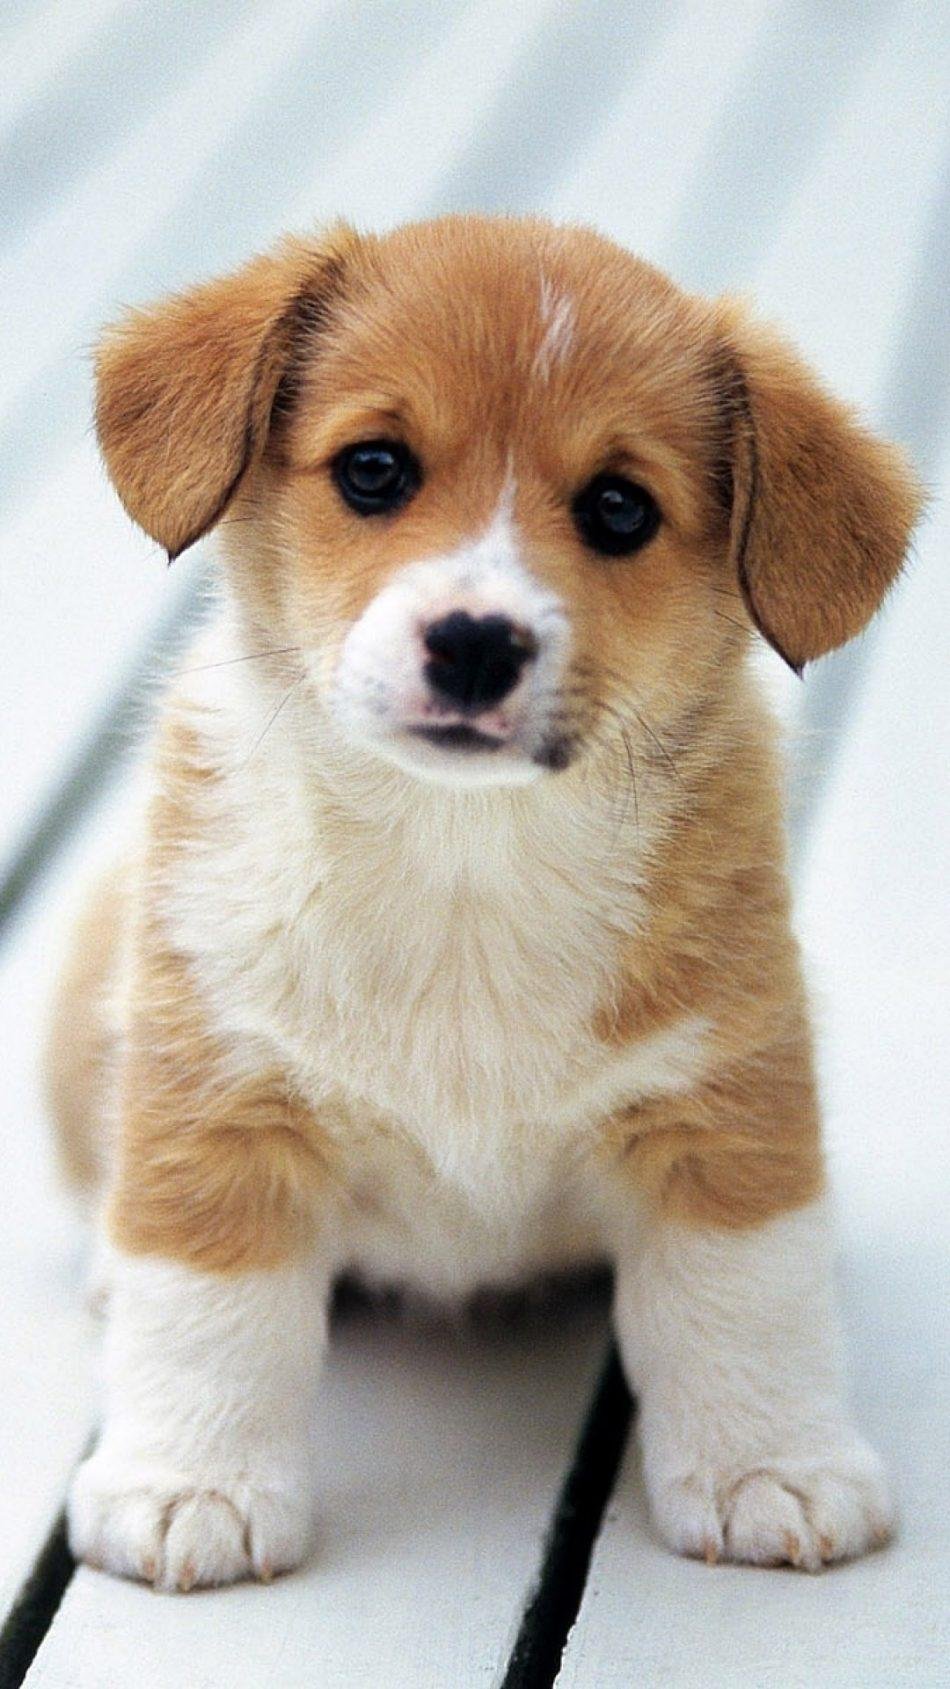 18000 Wallpaper Cute Puppy Pictures